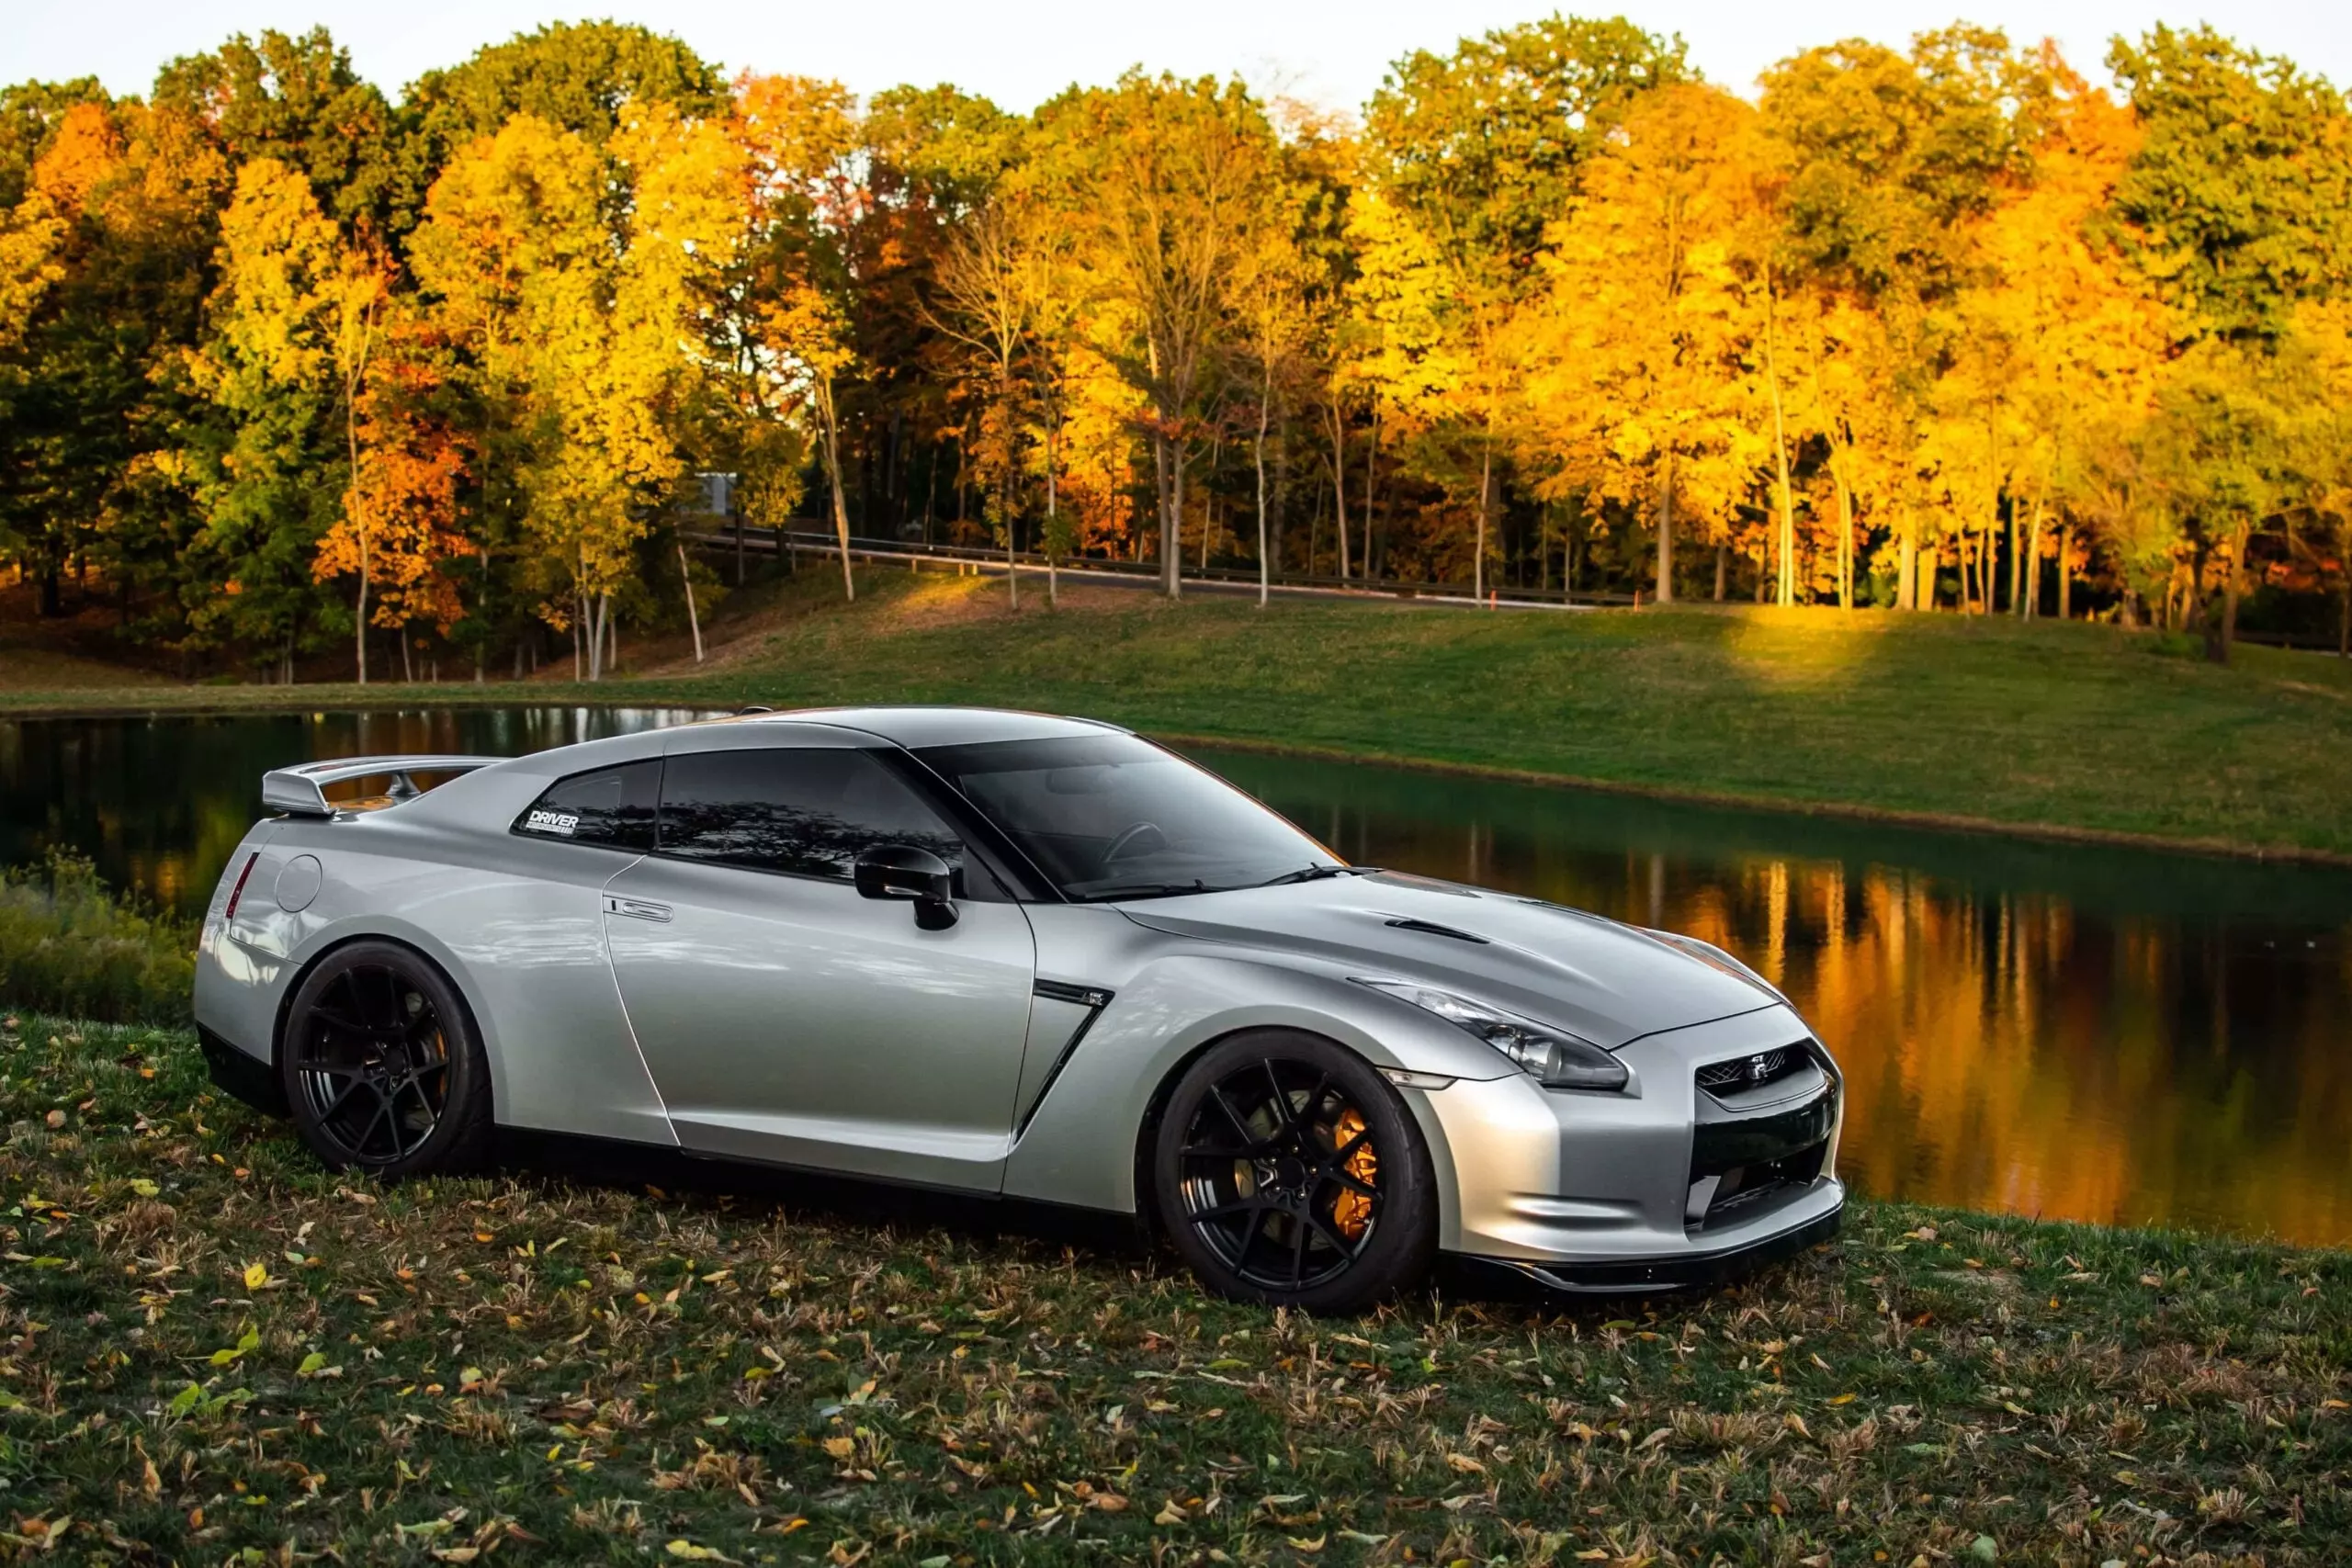 This Nissan GT-R Was Probably the Scariest Car I’ve Ridden In